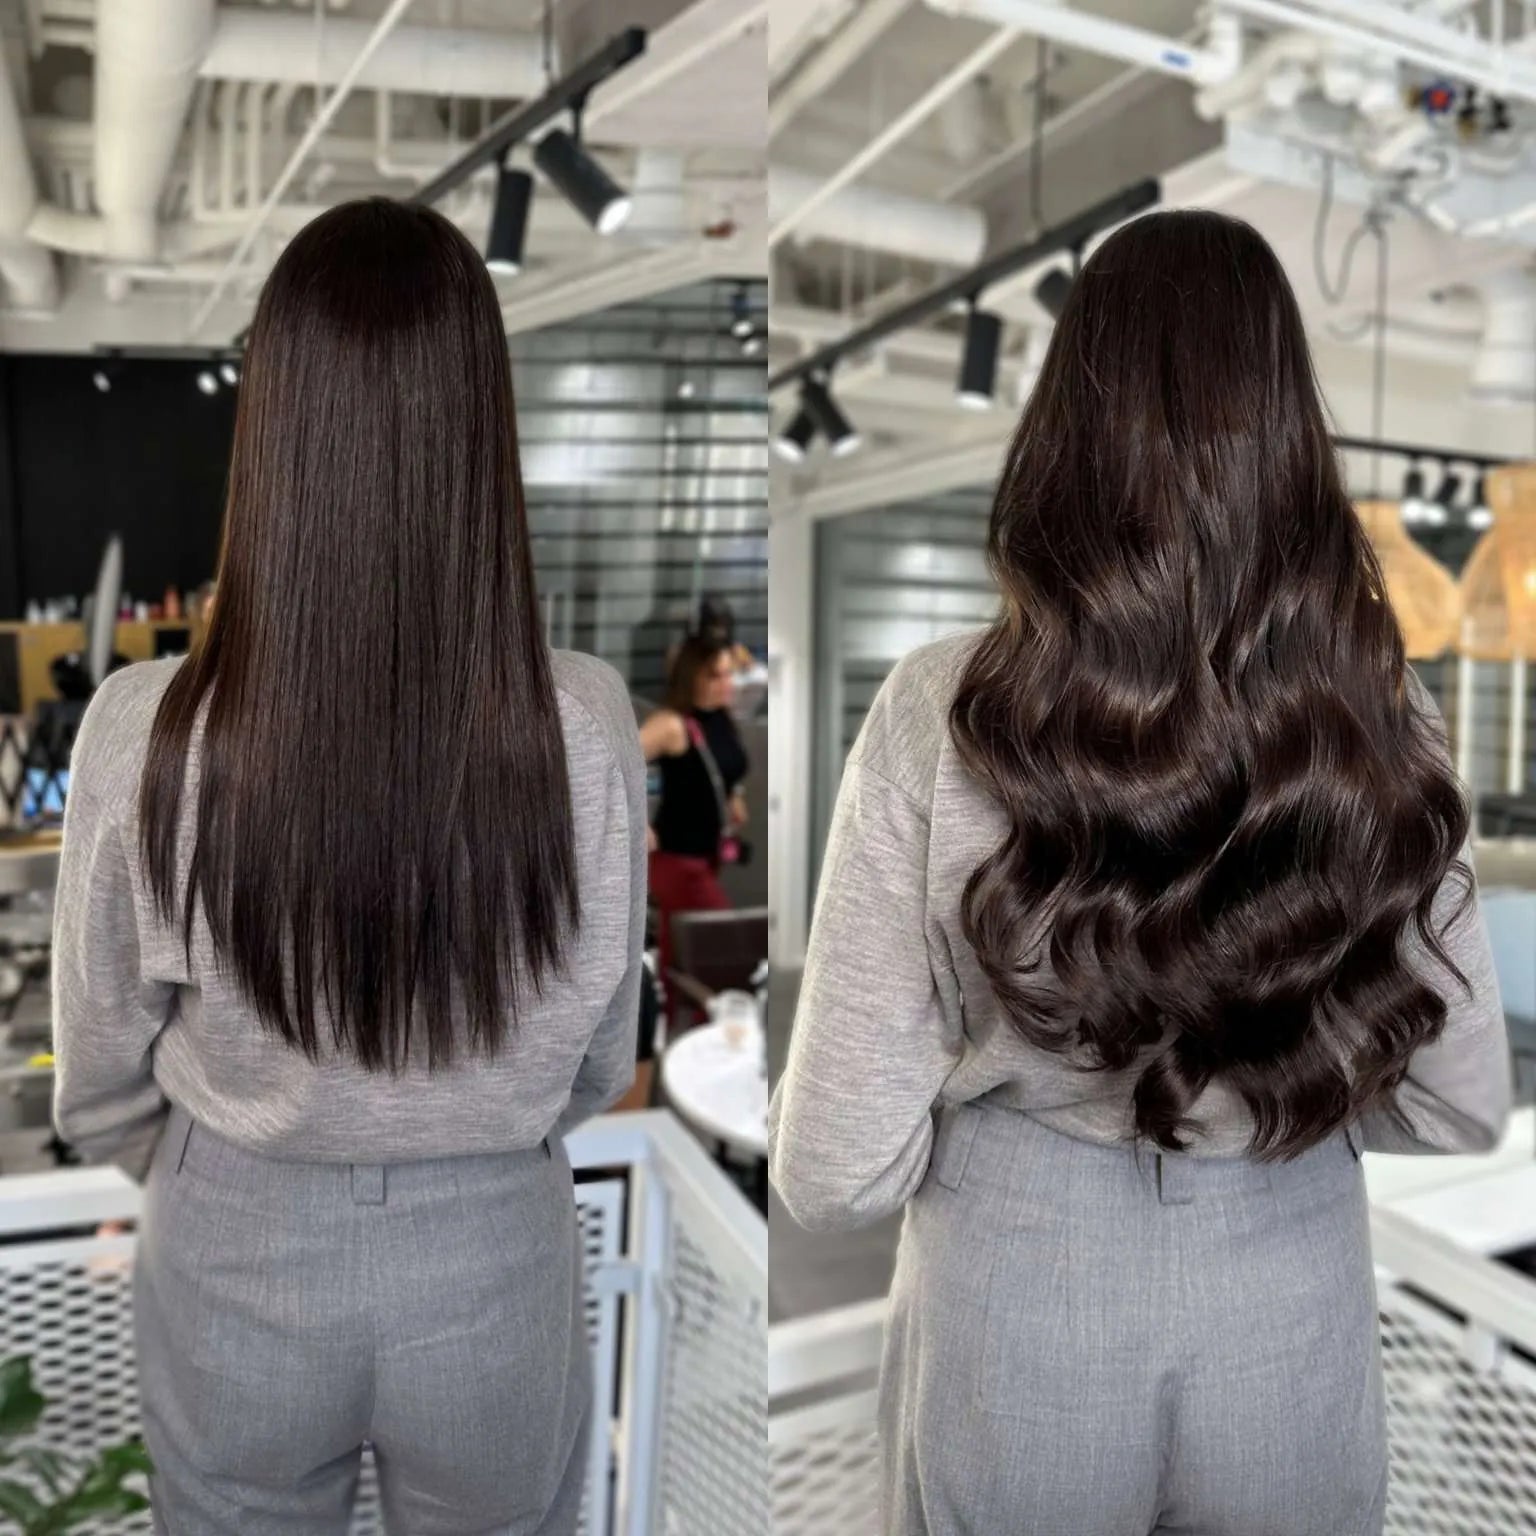 20 inch hair extensions before and after